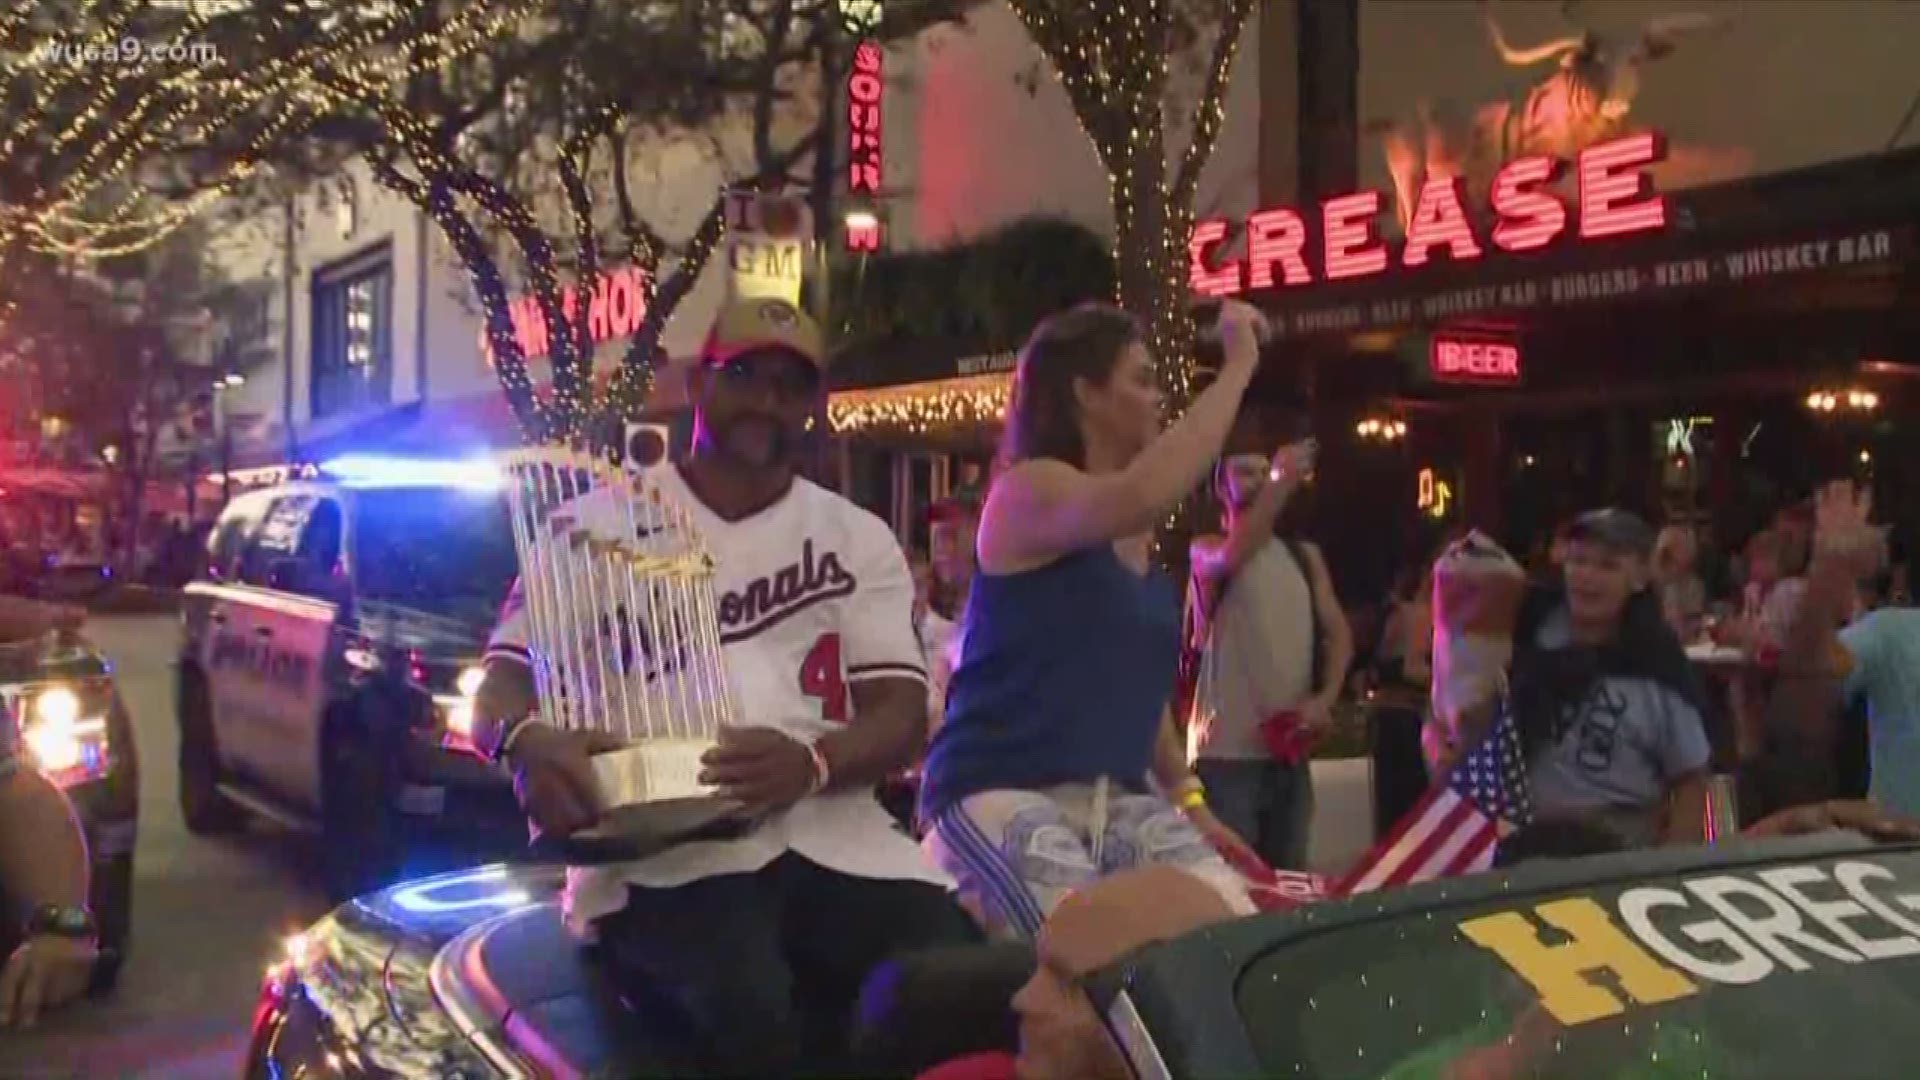 Members of the team will parade through downtown West Palm Beach with the World Series Trophy, culminating in a celebratory rally.